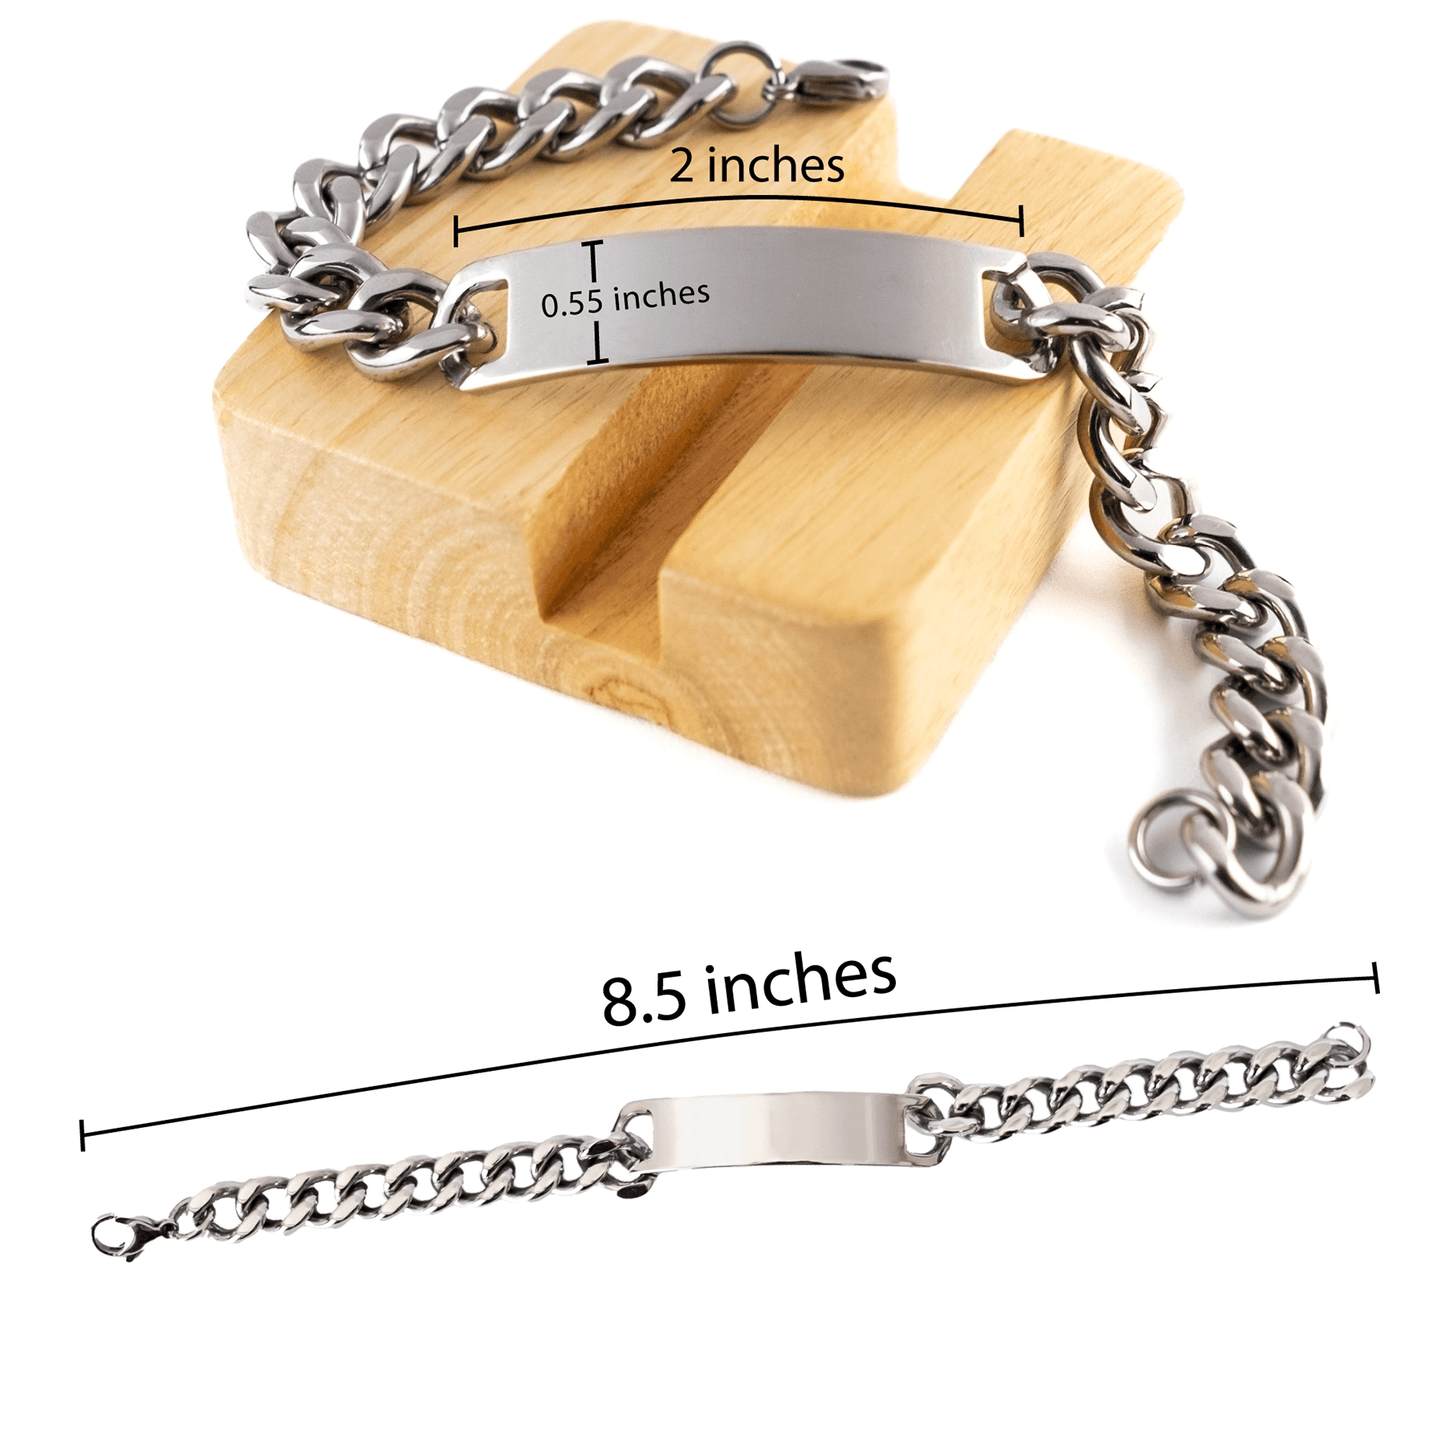 Machinist Cuban Chain Link Engraved Bracelet - Thanks for being who you are - Birthday Christmas Jewelry Gifts Coworkers Colleague Boss - Mallard Moon Gift Shop